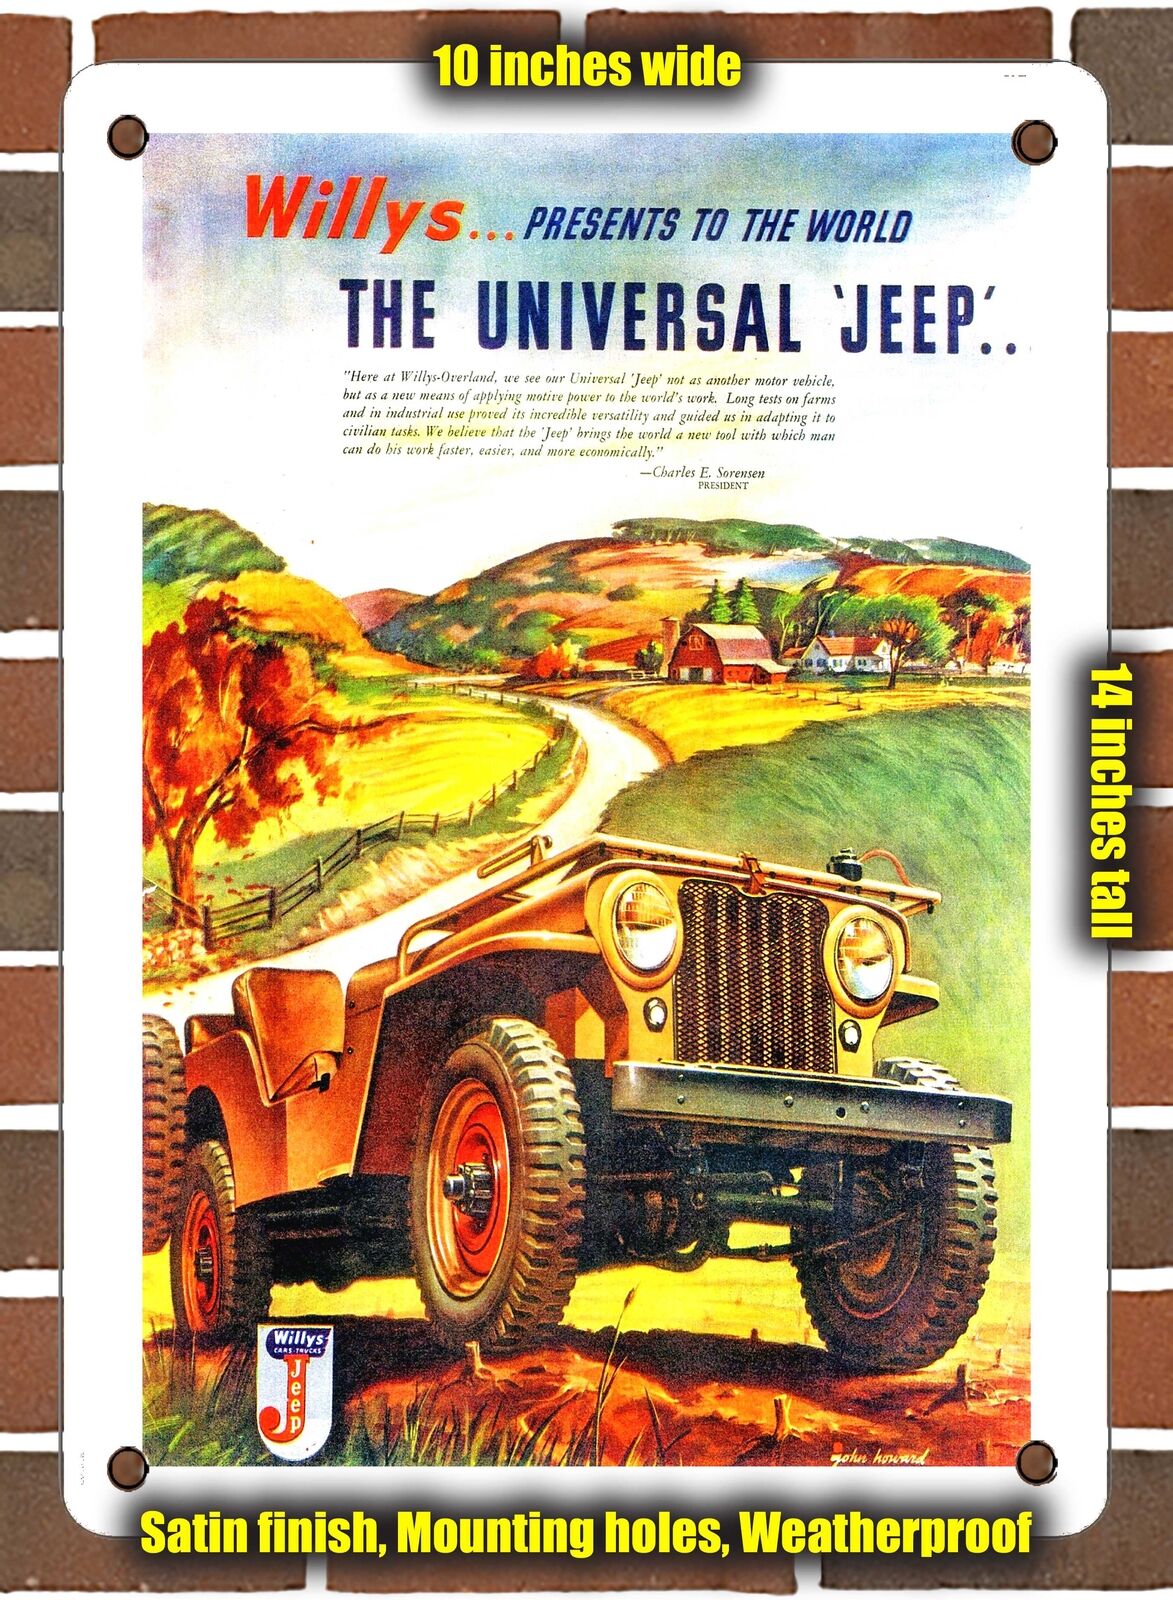 METAL SIGN - 1946 Willys Universal Jeeps - 10x14 Inches